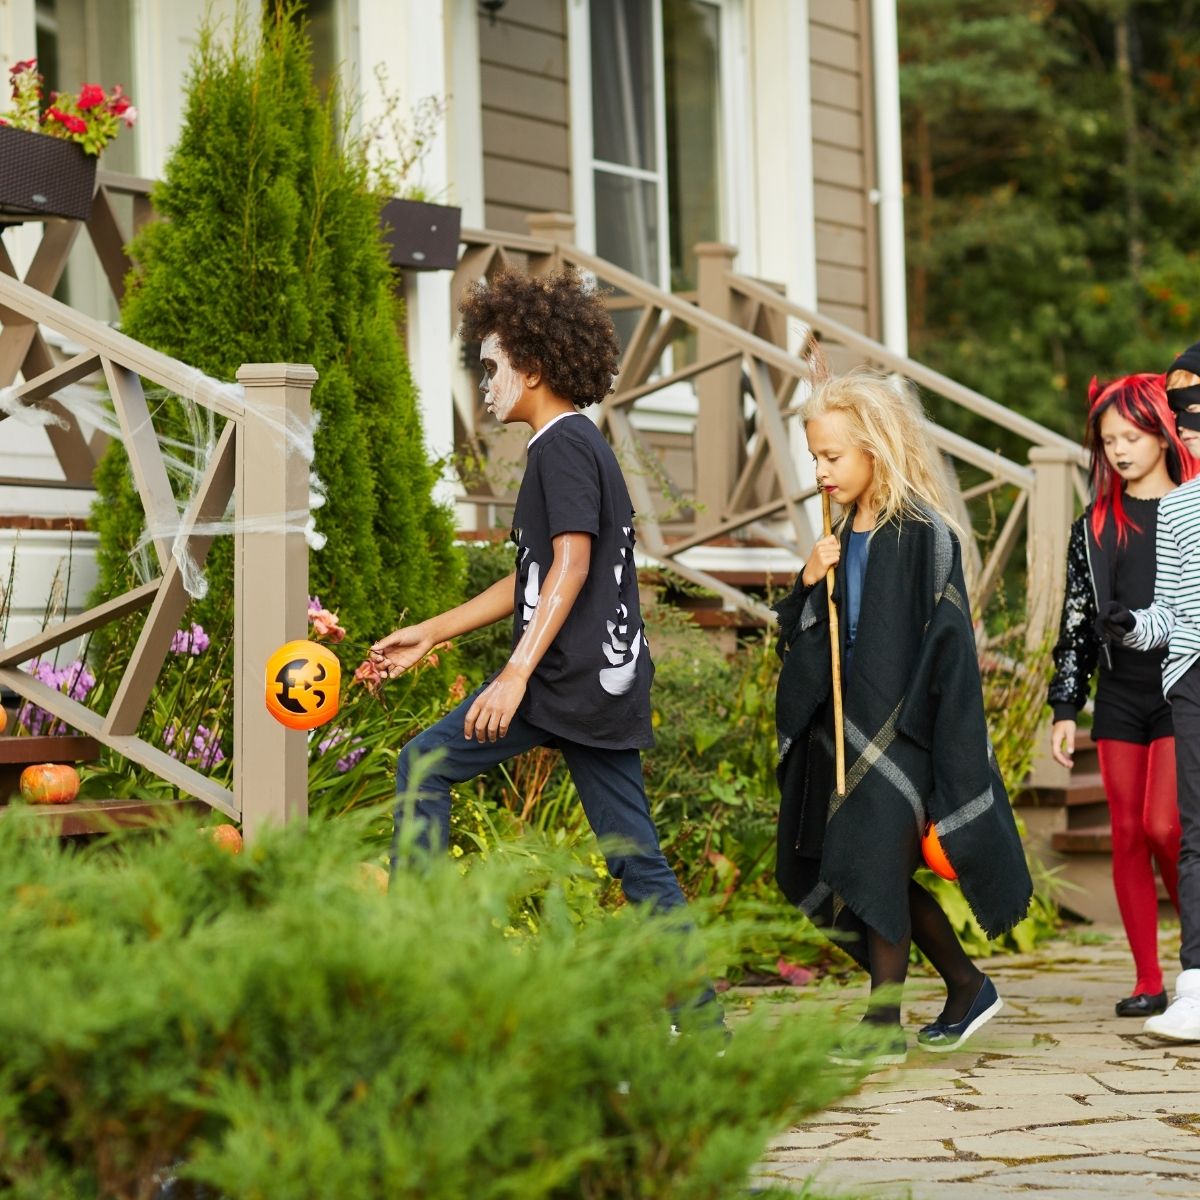 kids dressed up going trick or treating together